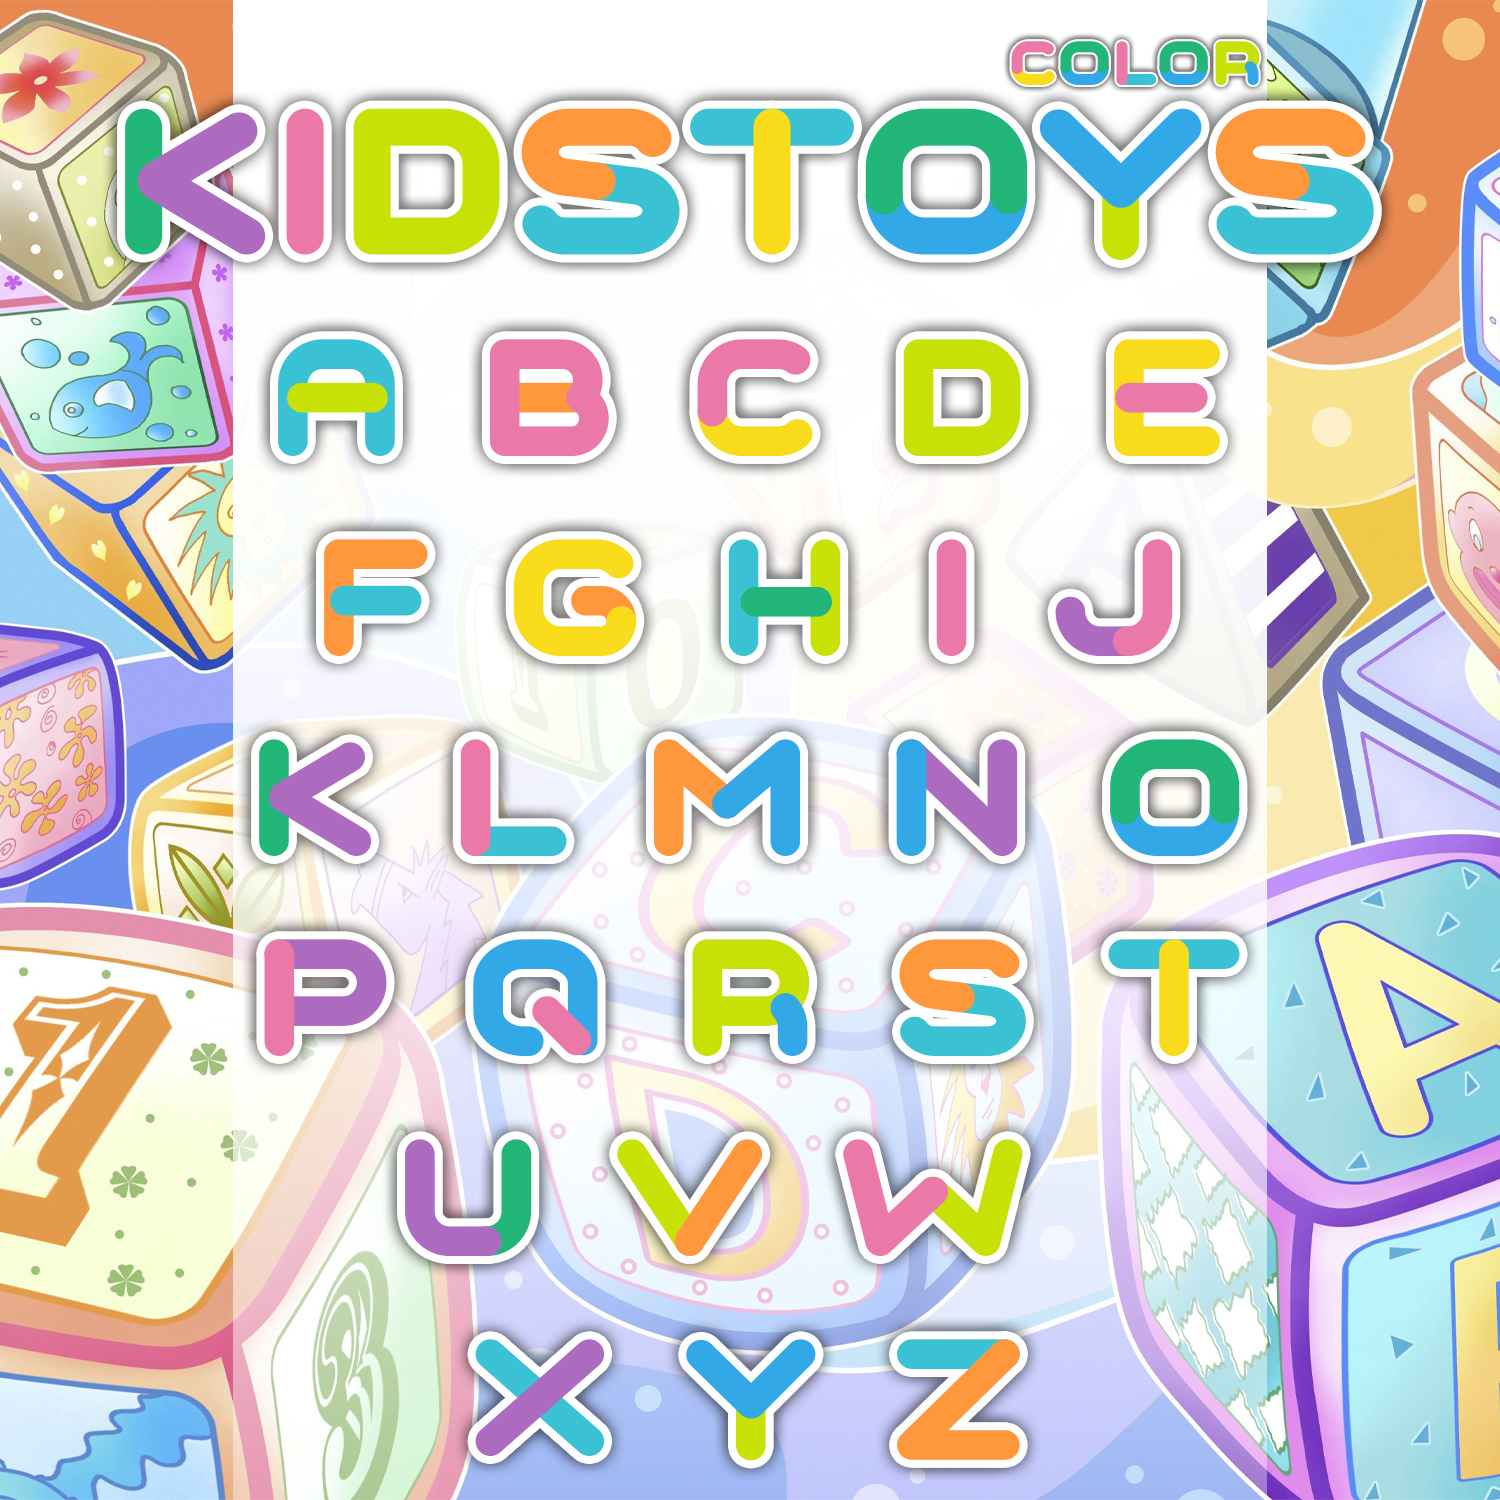 The alphabet is predicted using the font.